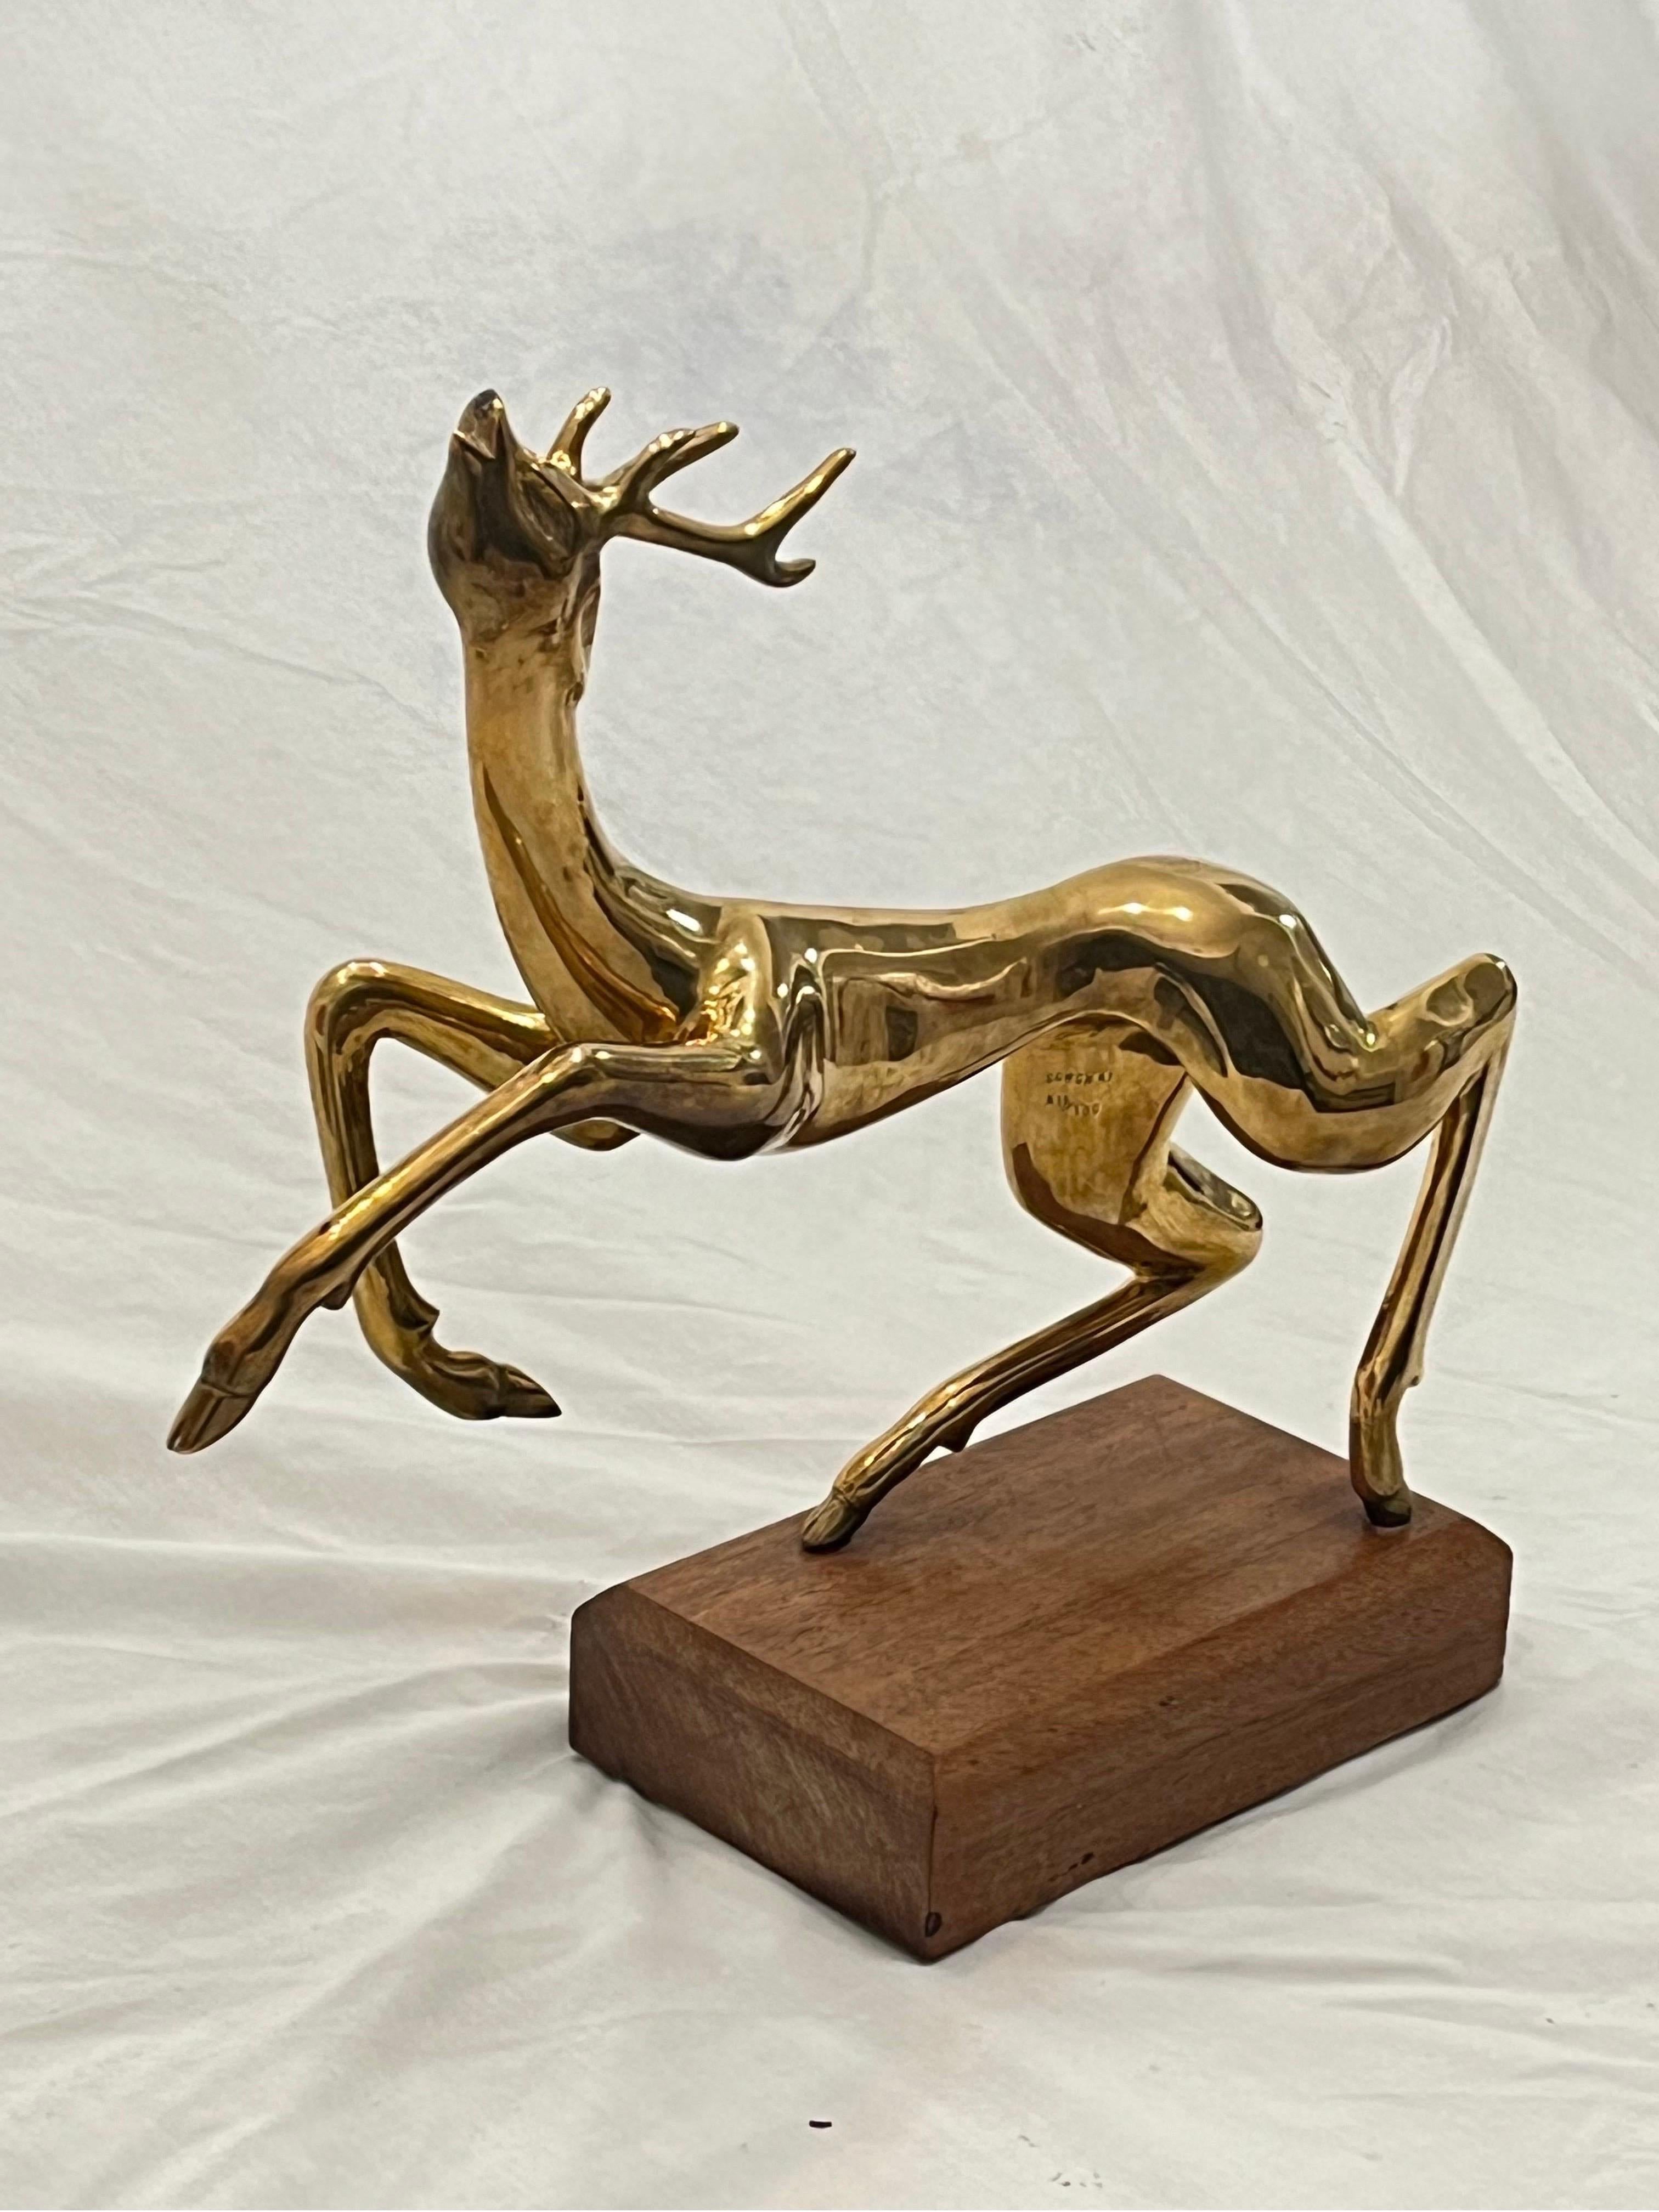 Vintage Thai Somchai Hattakitkosol Signed Solid Bronze Sculpture of Leaping Deer For Sale 4